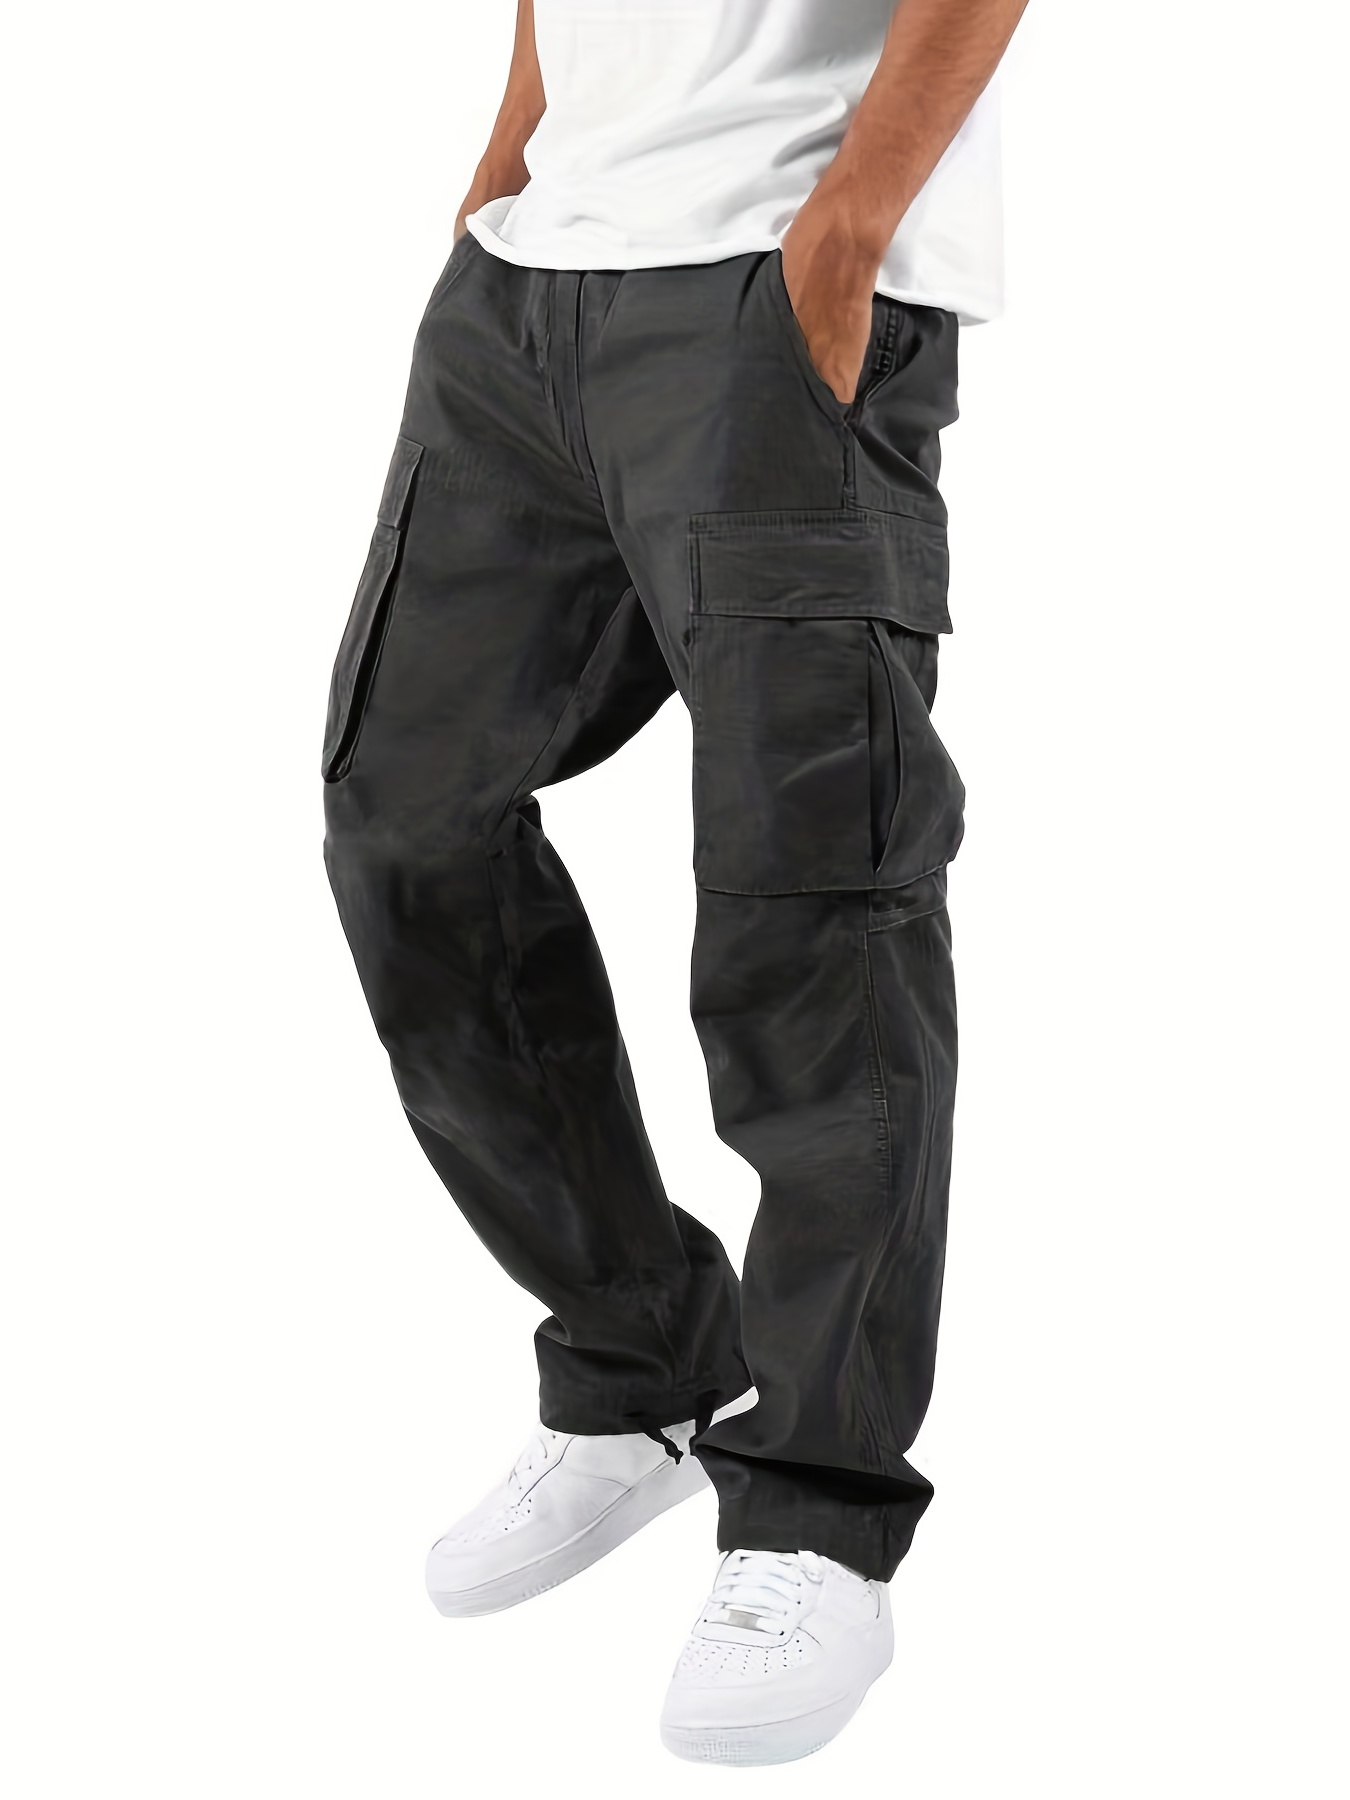 Stay Cool on Jobsites with Work Pants for Hot Weather - IronPros